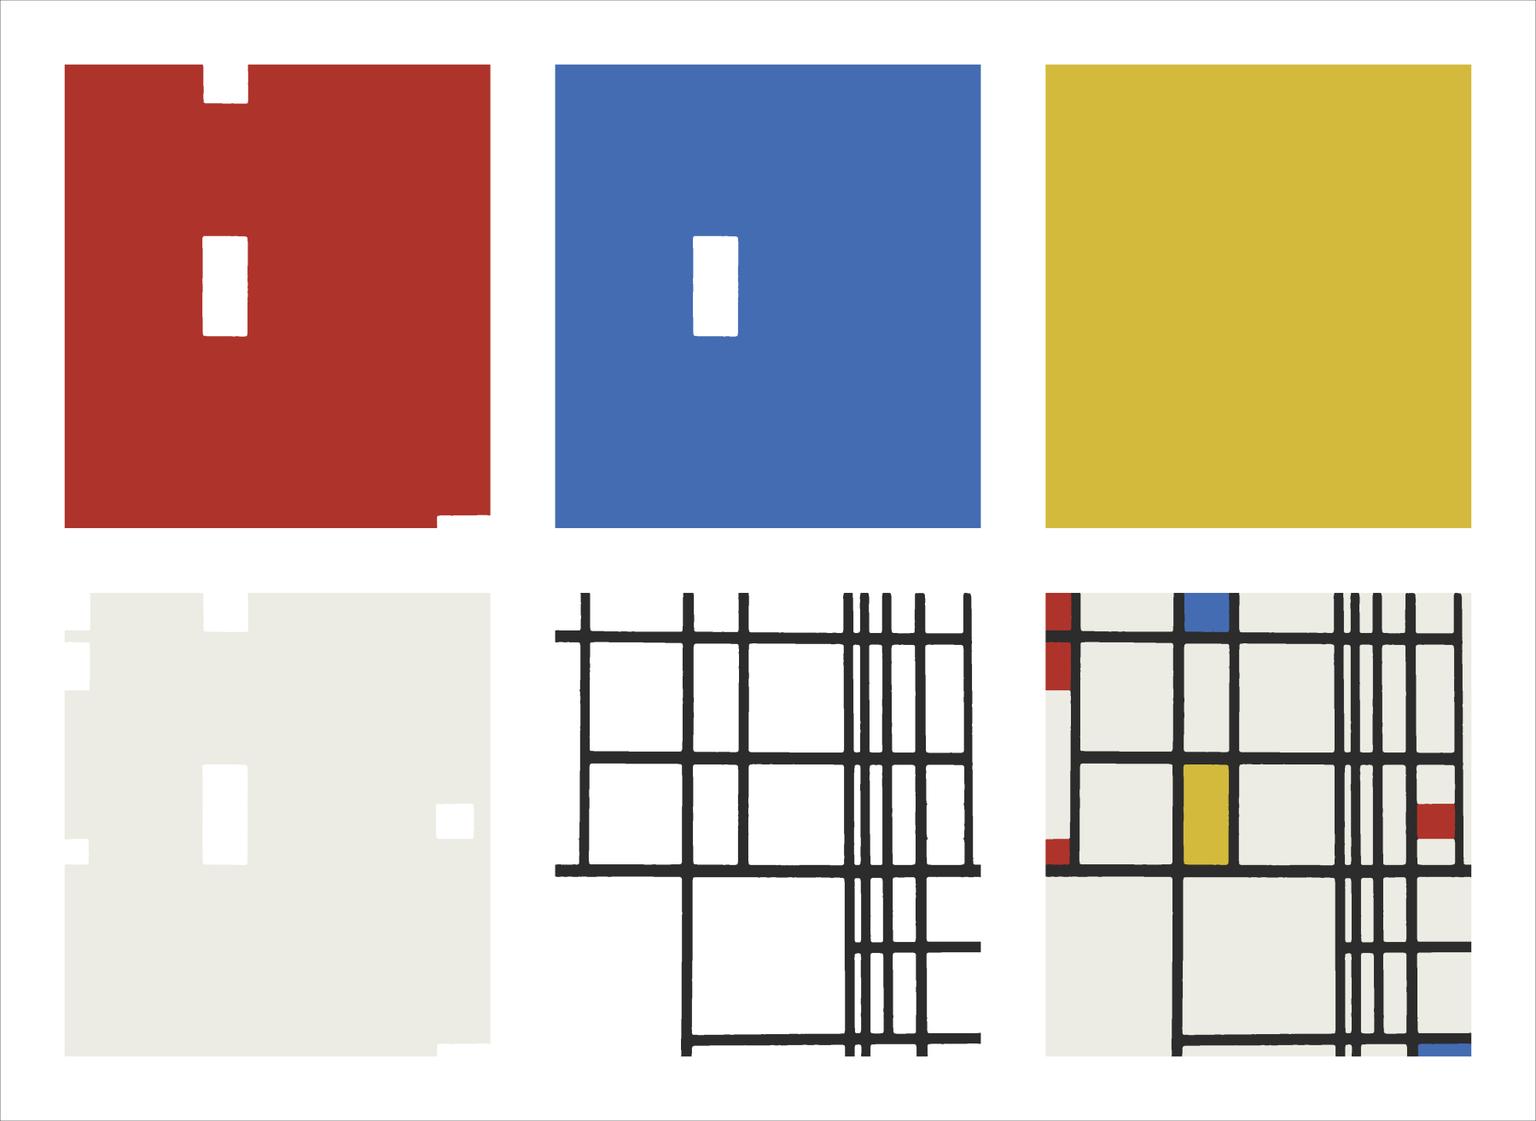 Image for entry 'Deconstructing and Reconstructing Piet Mondrian’s "Composition in Red, Blue, and Yellow"'